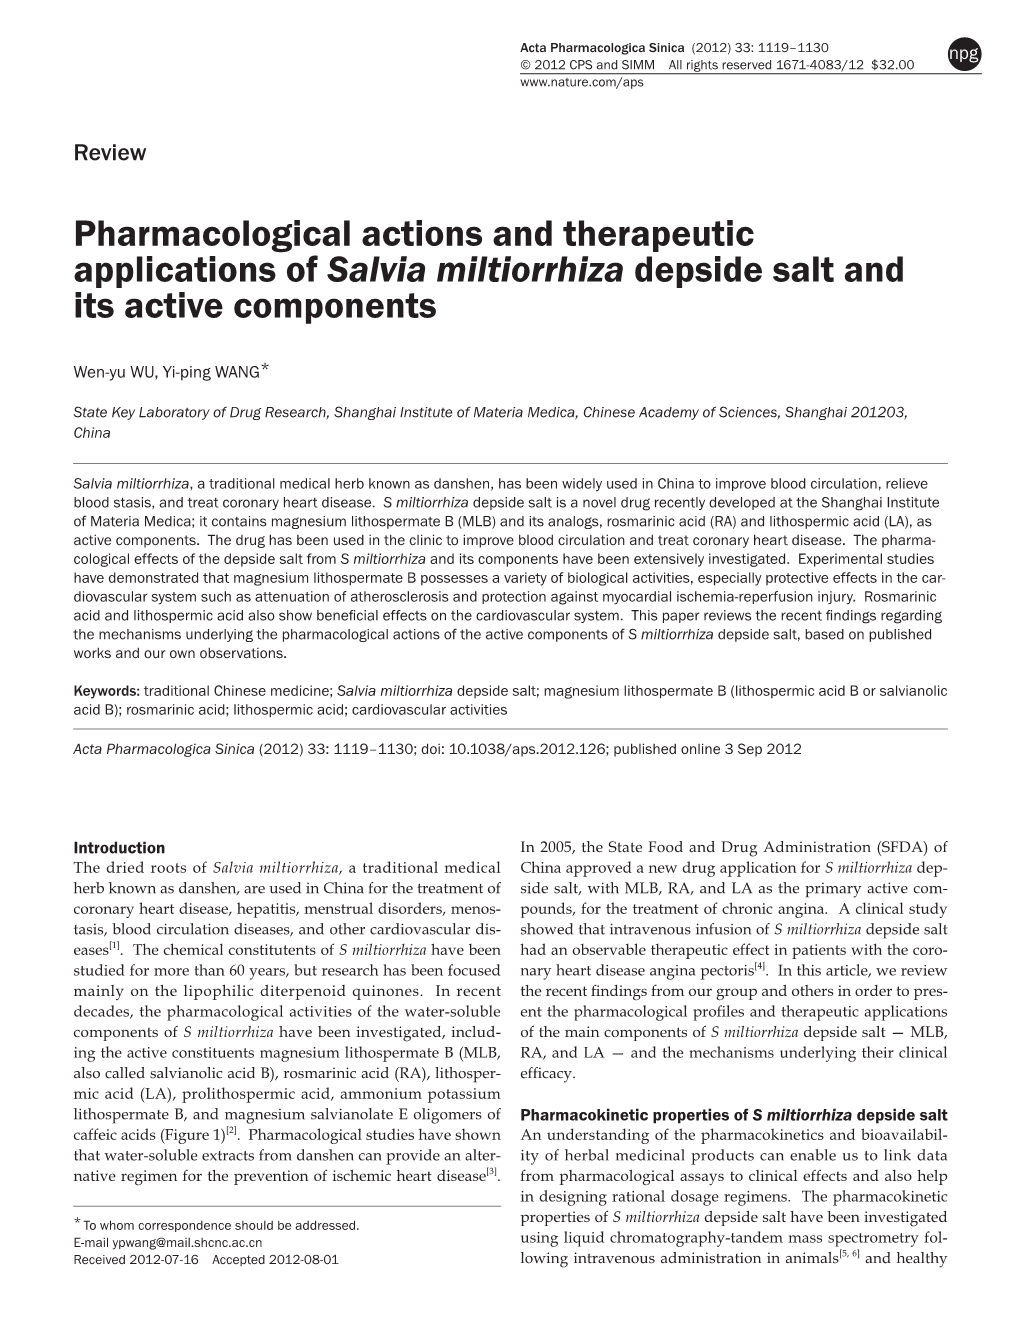 Pharmacological Actions and Therapeutic Applications of Salvia Miltiorrhiza Depside Salt and Its Active Components